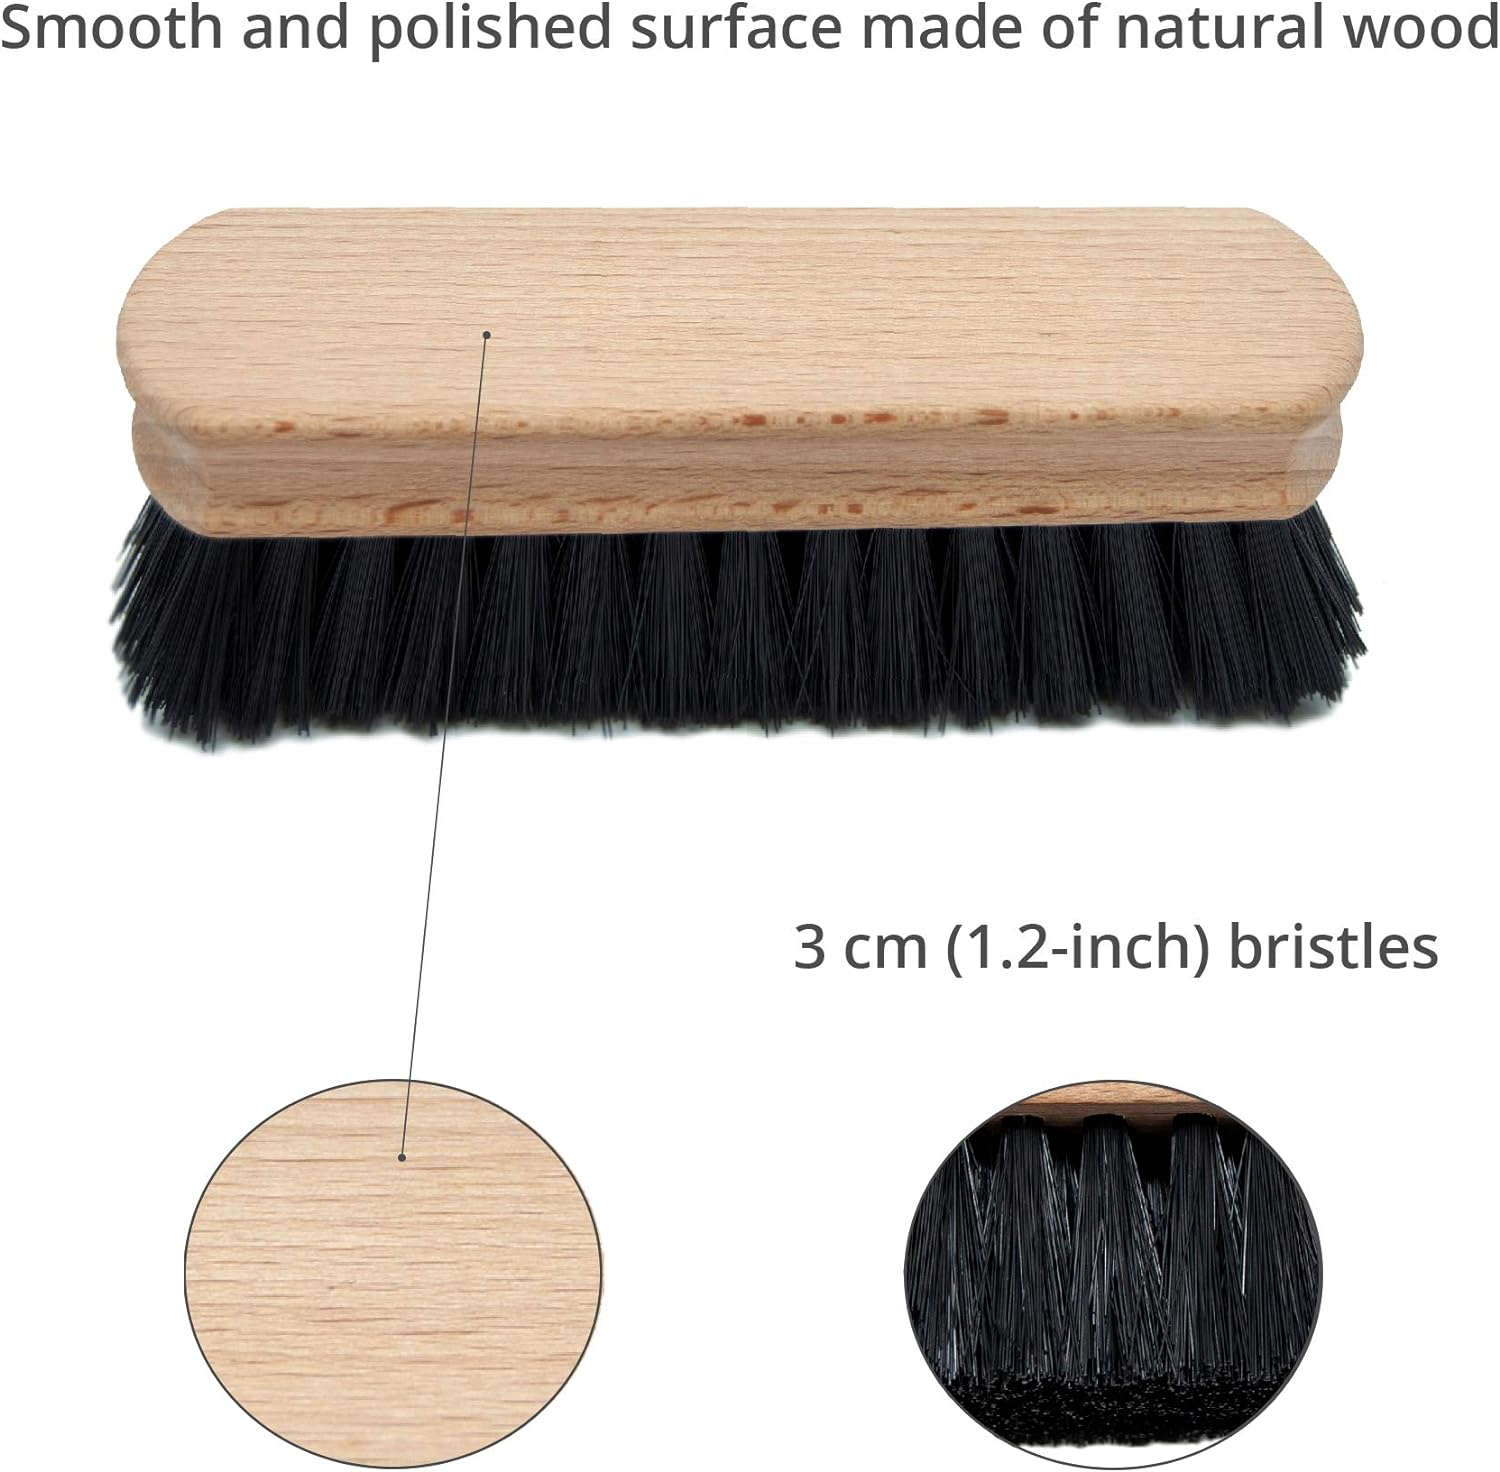 Boot Brush - Shoe and Boot Cleaner Brush, Shoe Brush With Comfortable Handle